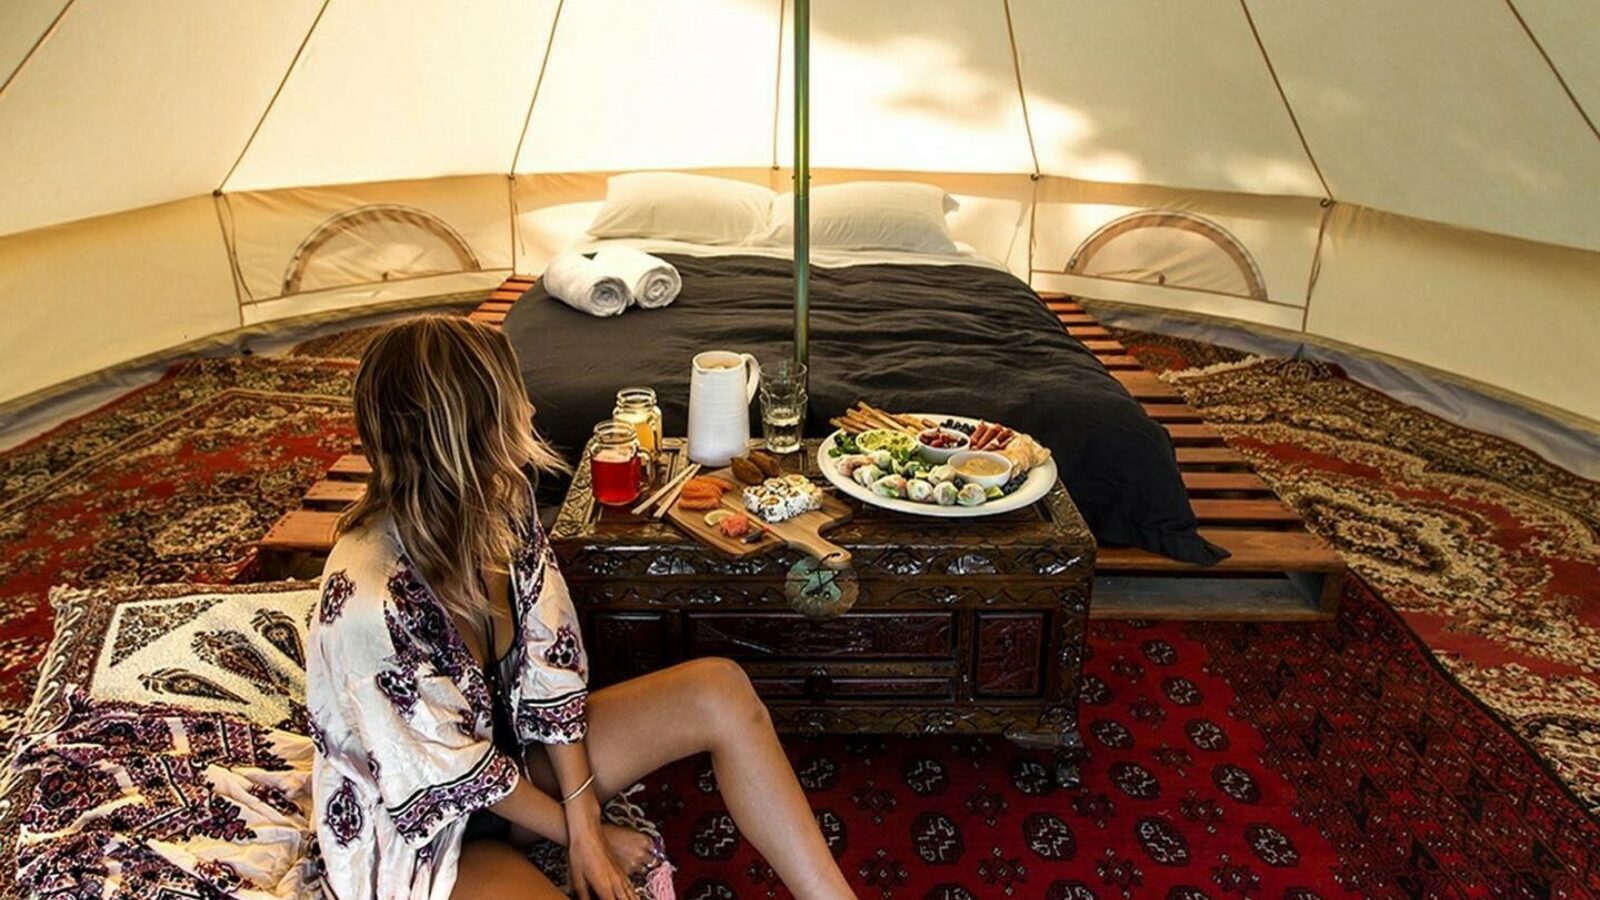 Simple Pleasures Camping Co glamping tent interior